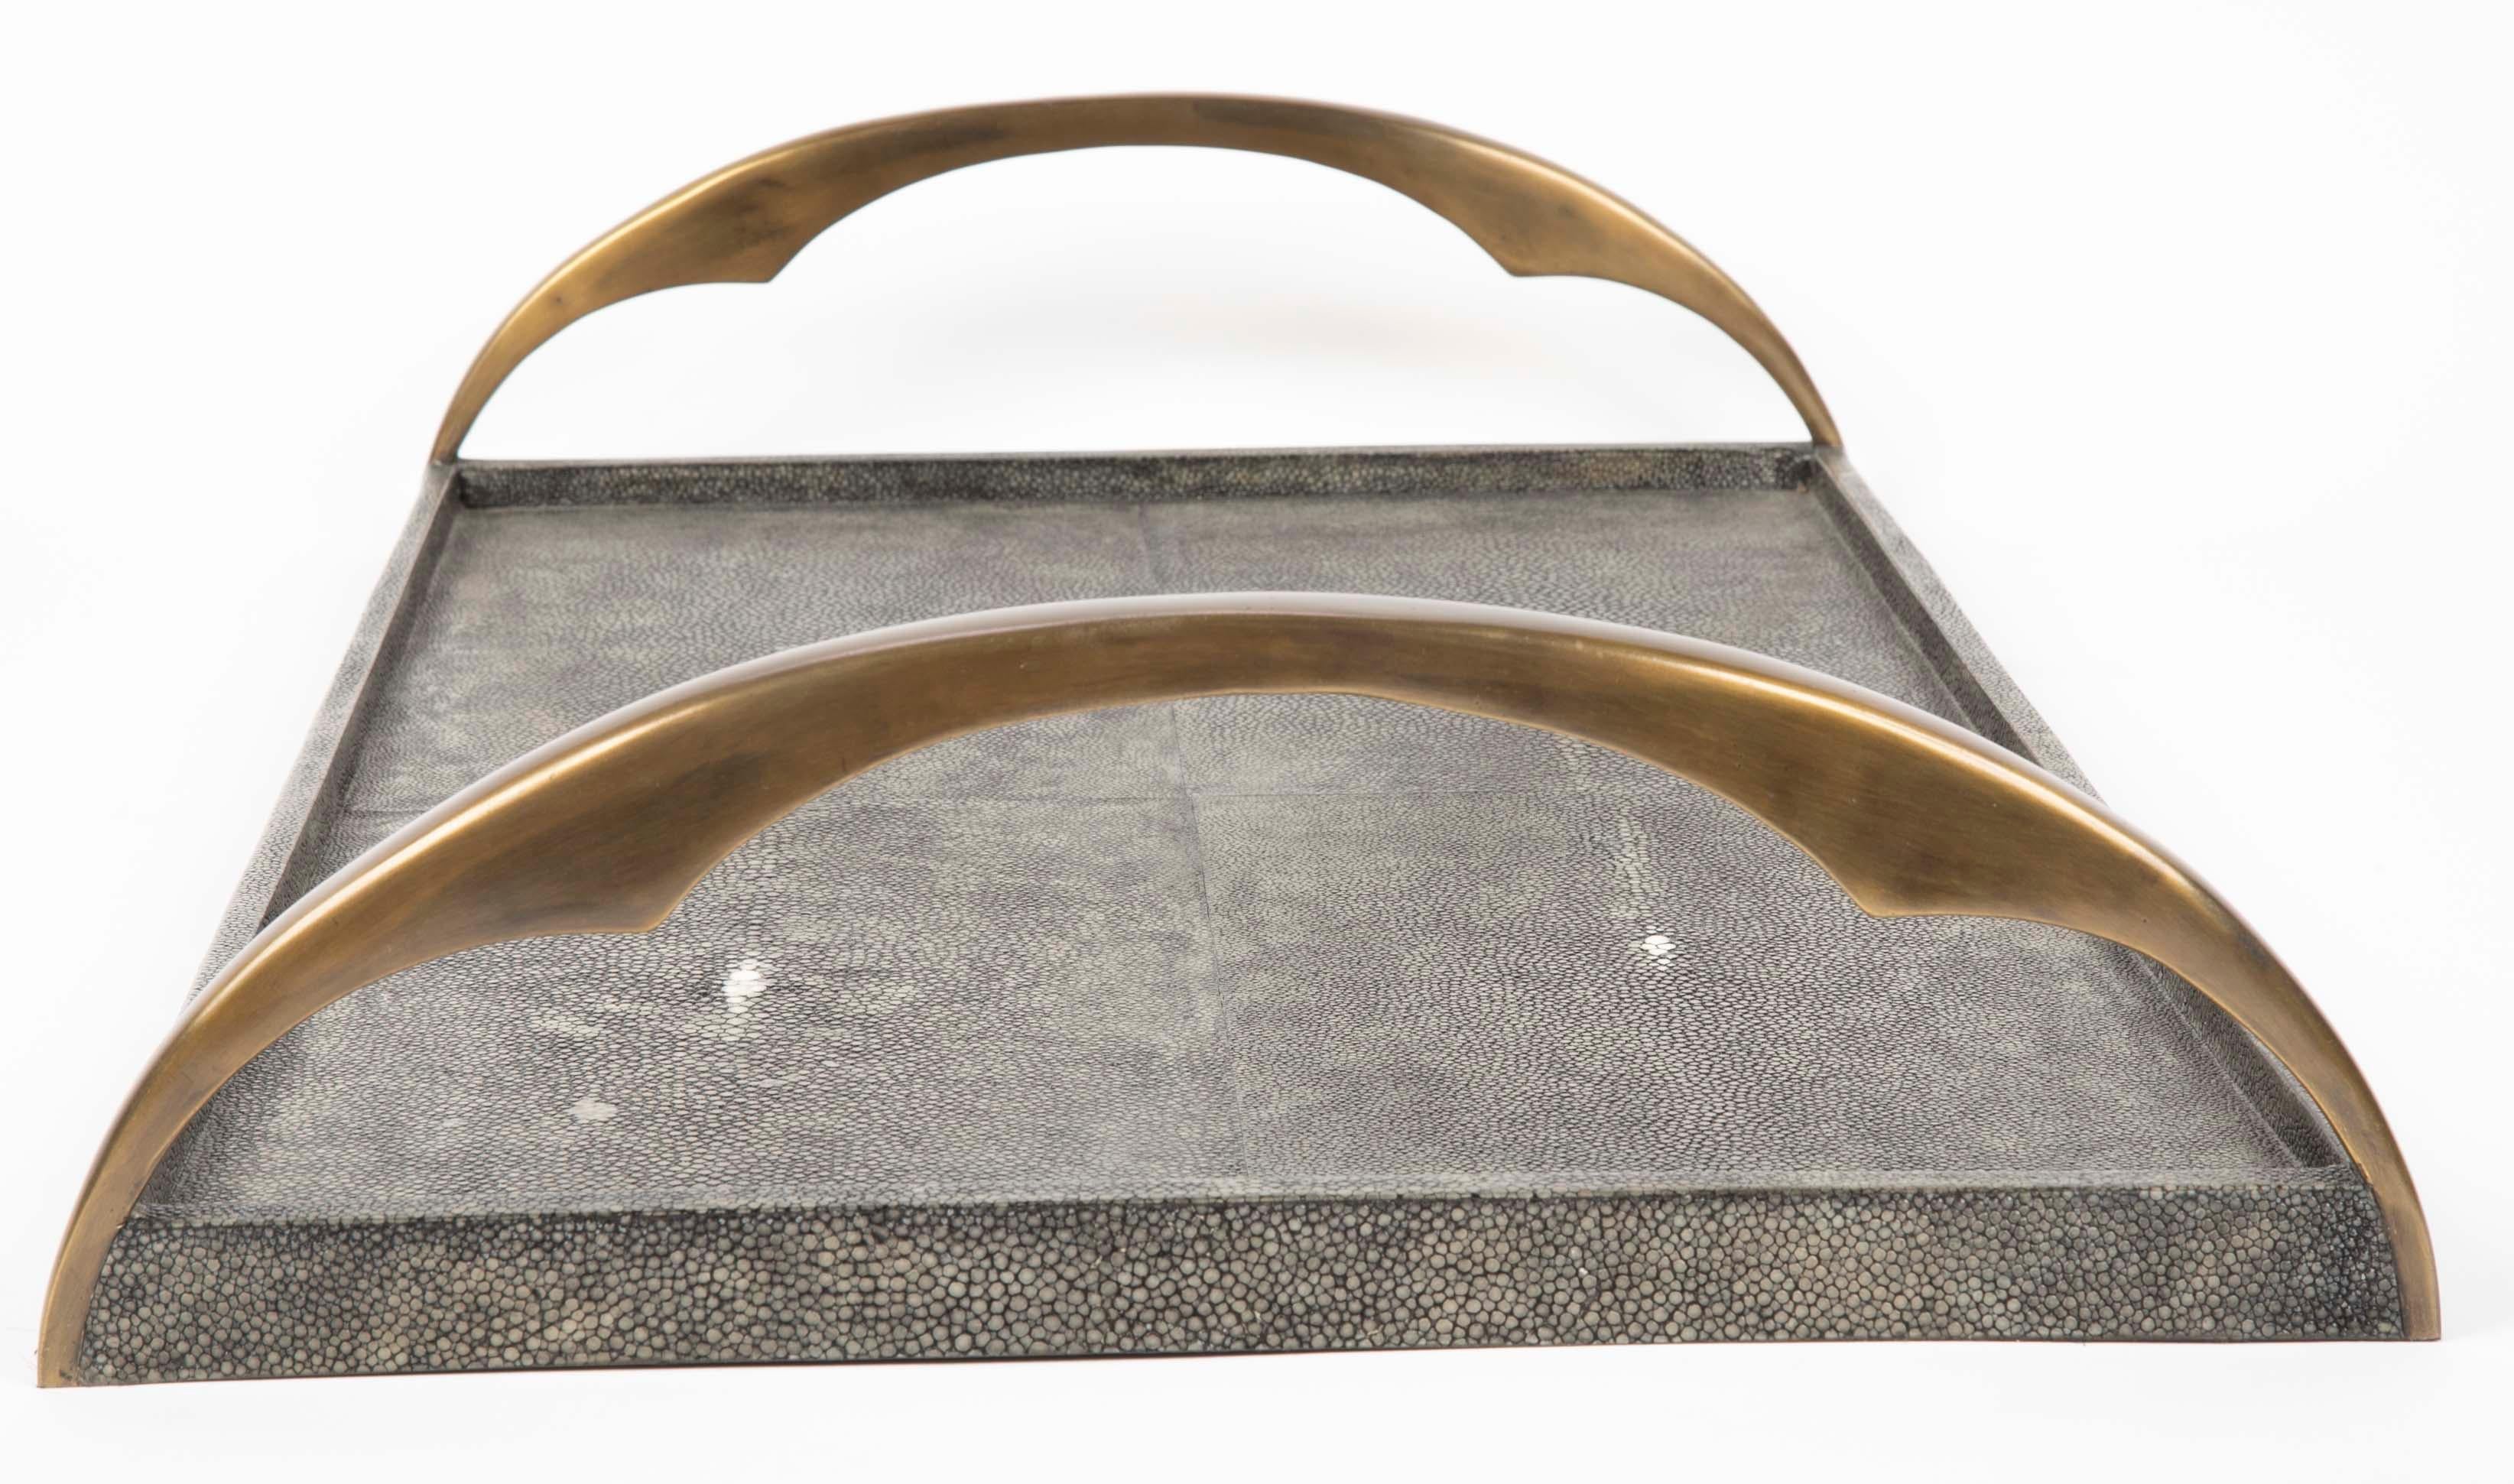 Late 20th Century Stingray Shagreen Tray with Bronze Handles by Augousti